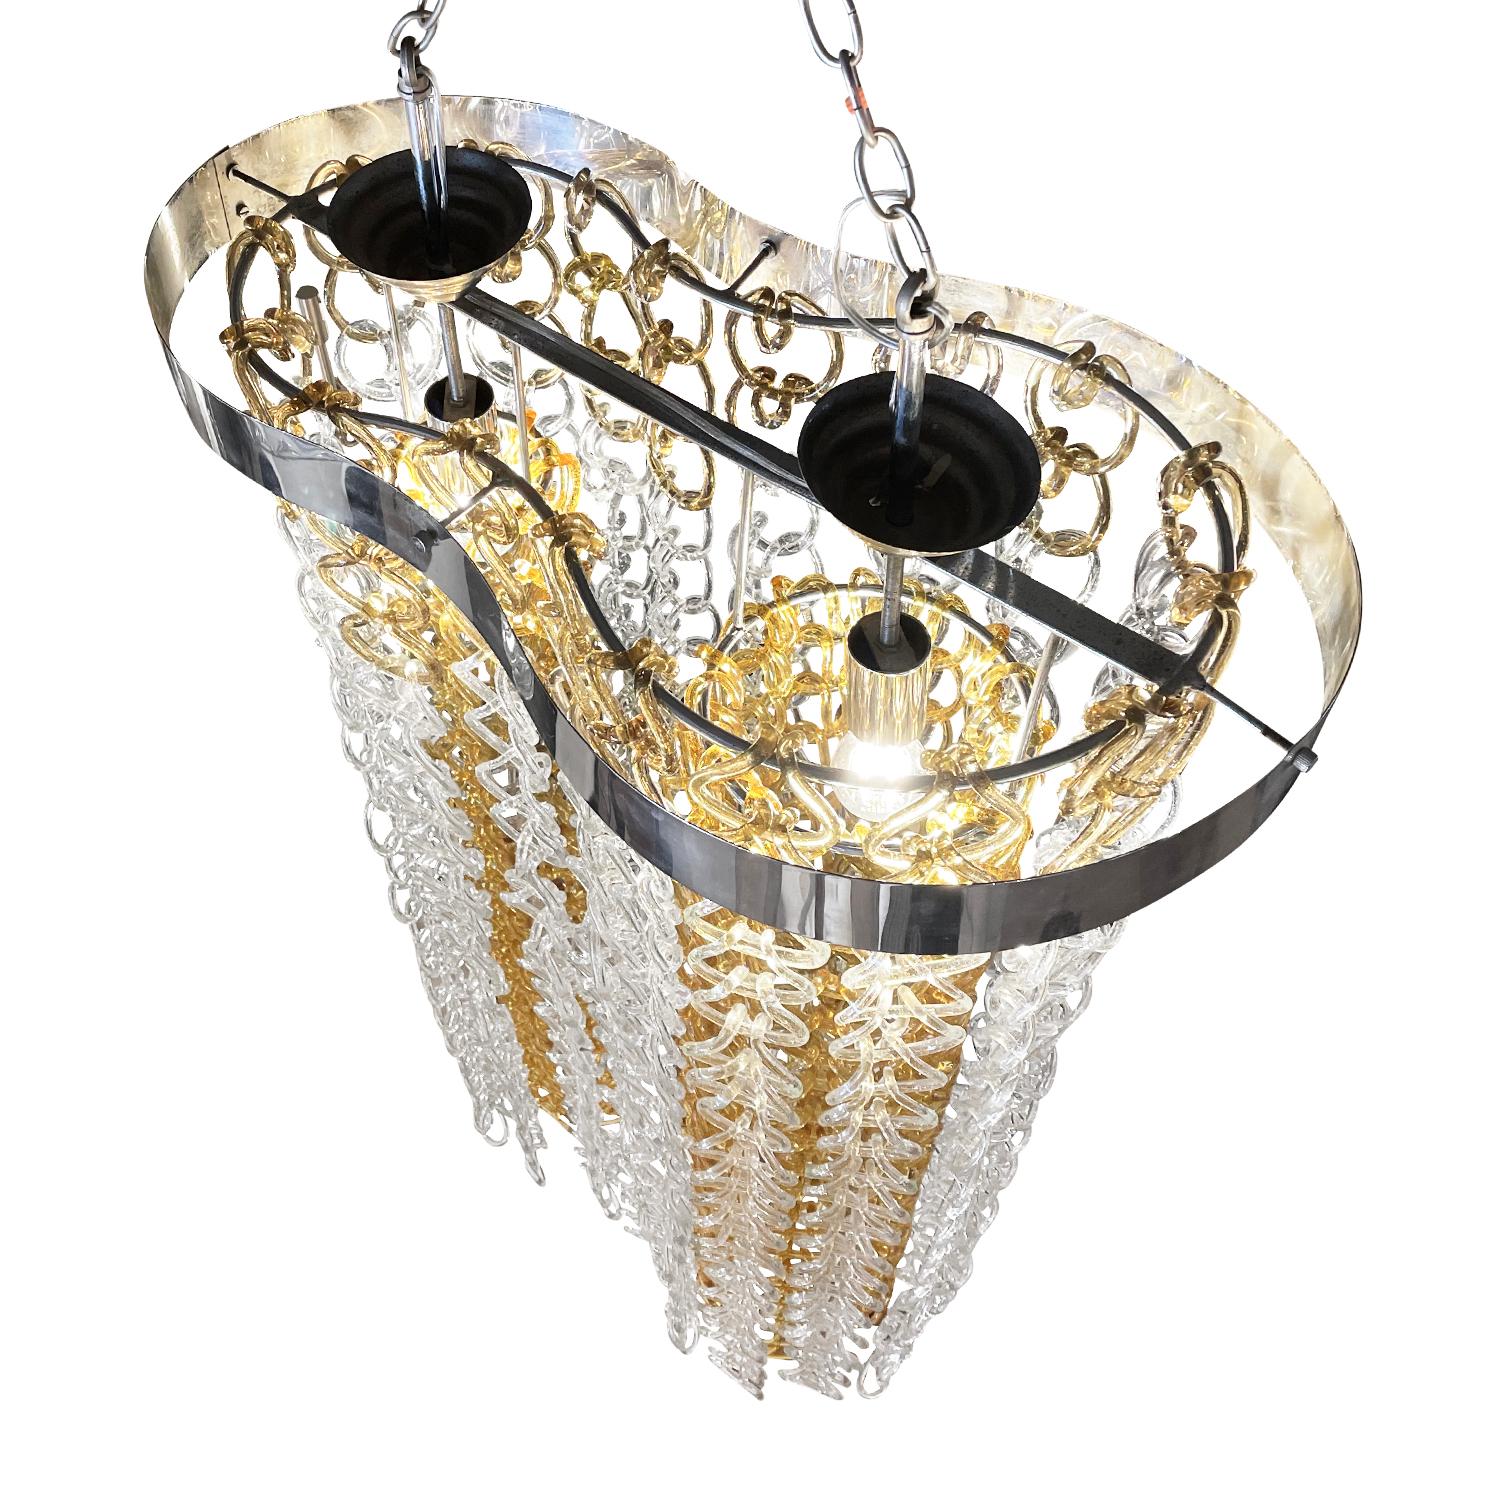 Hand-Crafted 20th Century Italian Modern Crystal Glass Chandelier by Angelo Mangiarotti For Sale